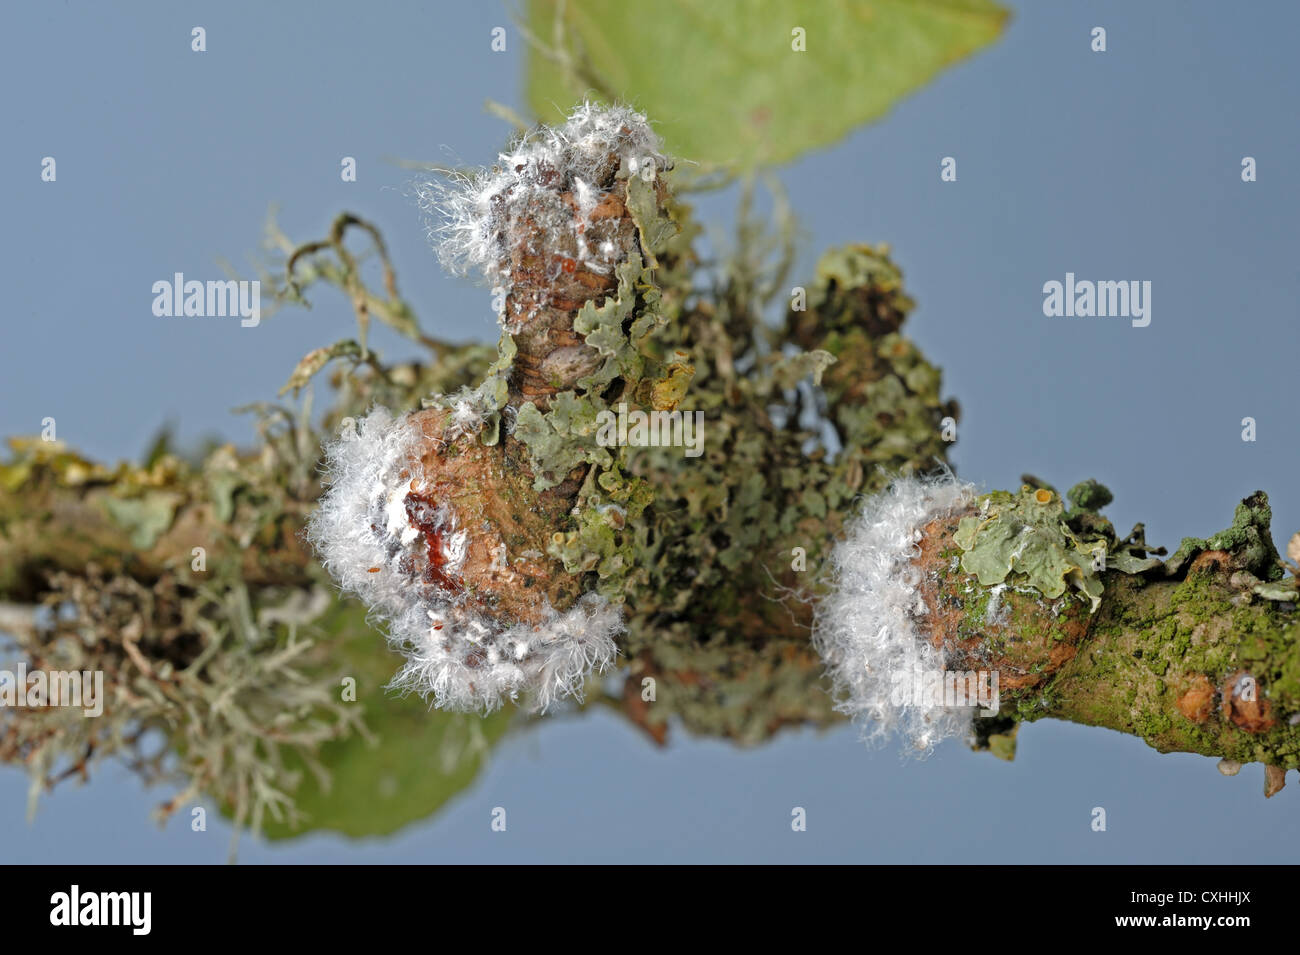 Woolly aphid Eriosoma lanigerum colony and scars with waxy extrusions and aphids on apple wood Stock Photo